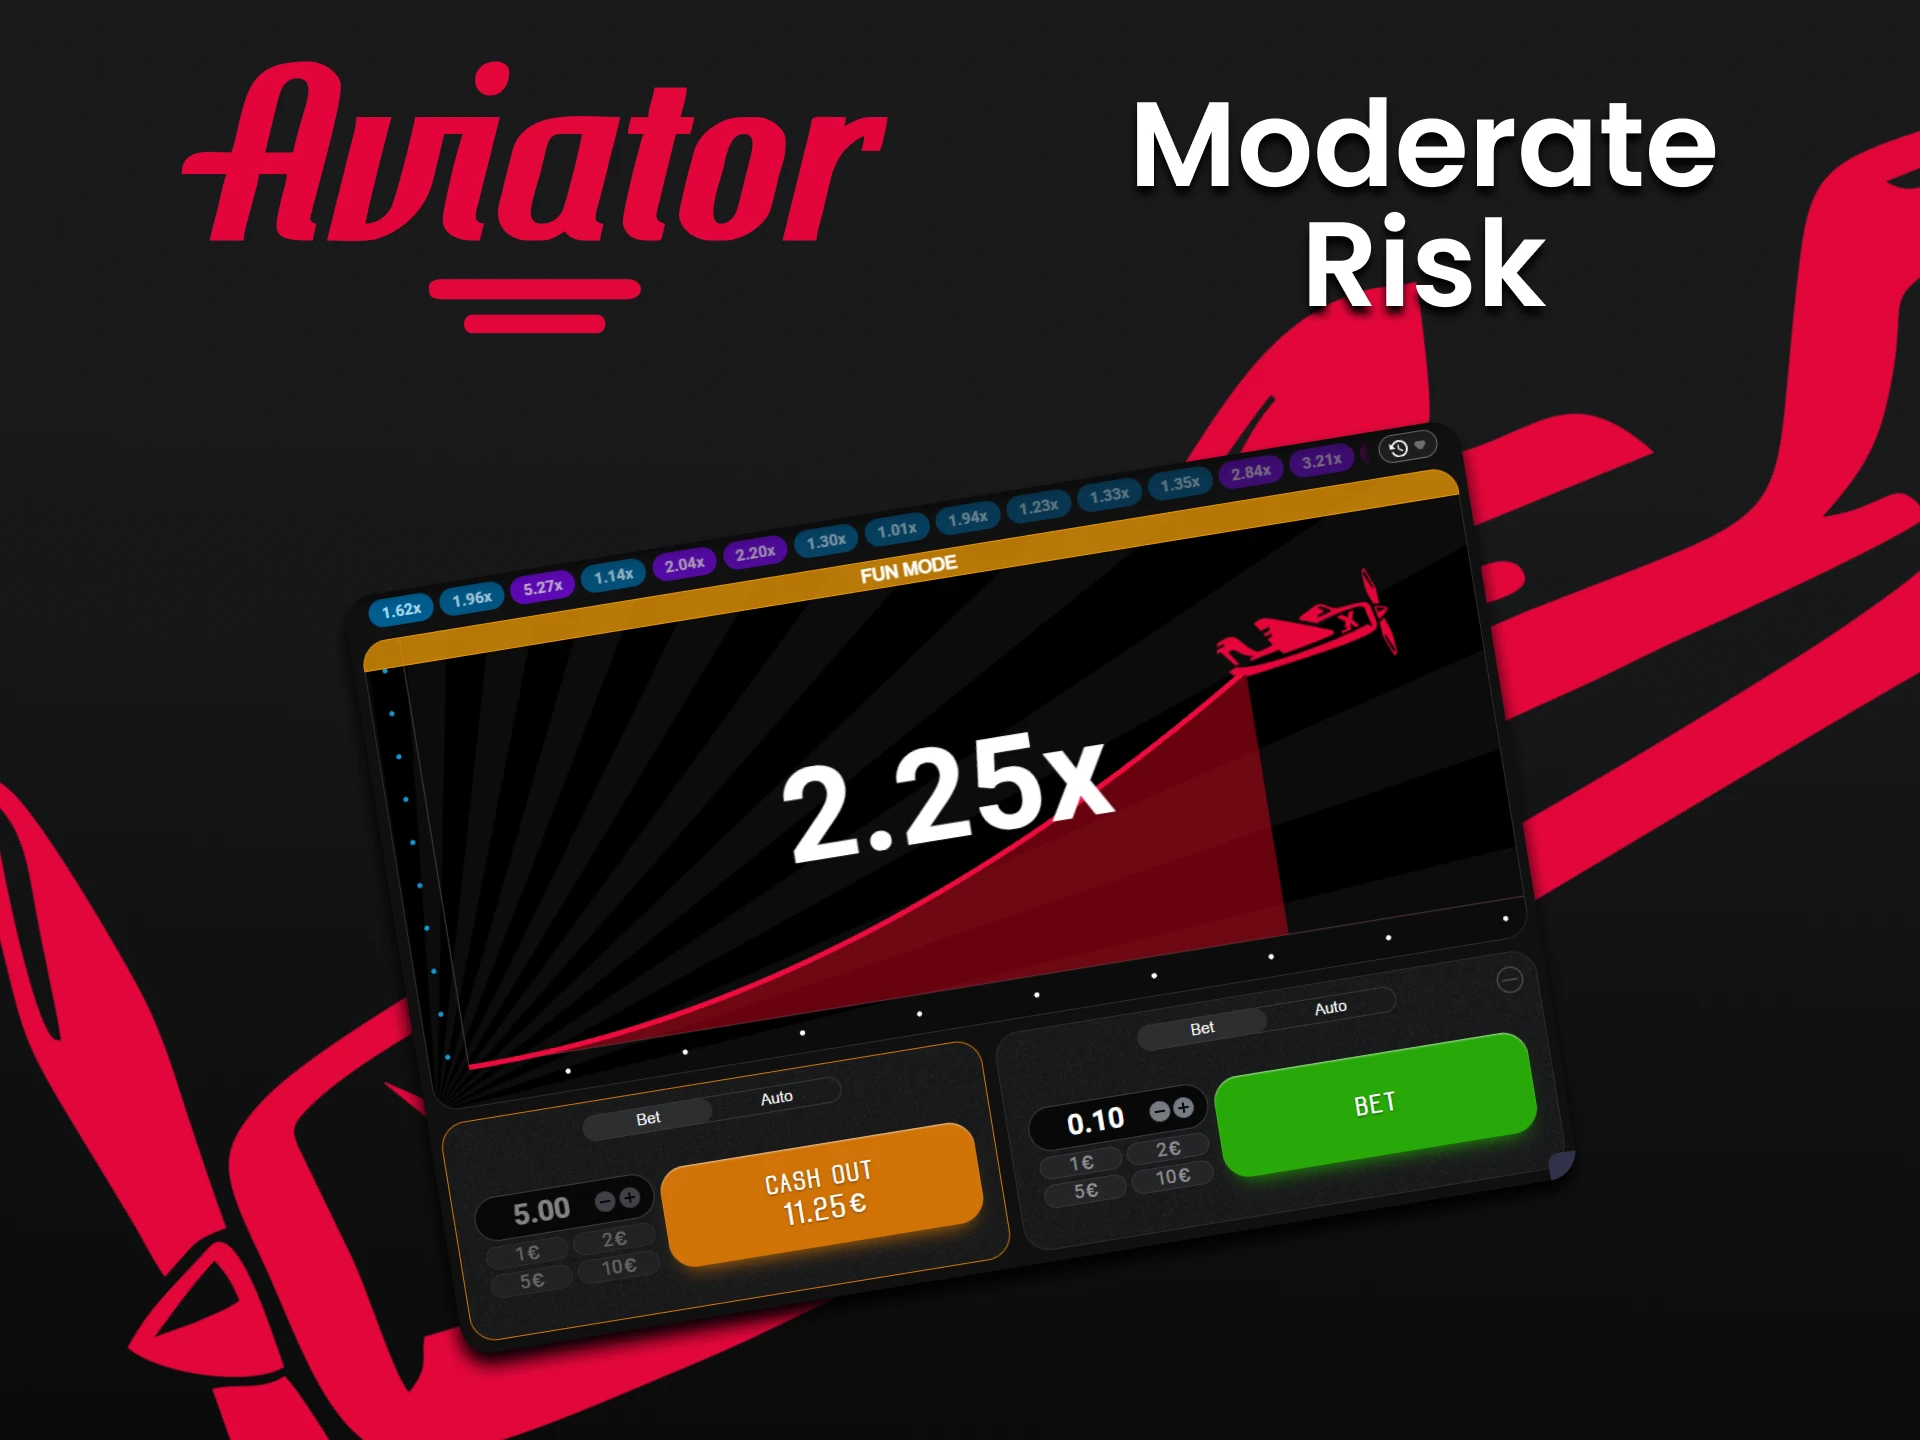 Play without much risk to increase your wins in Aviator.